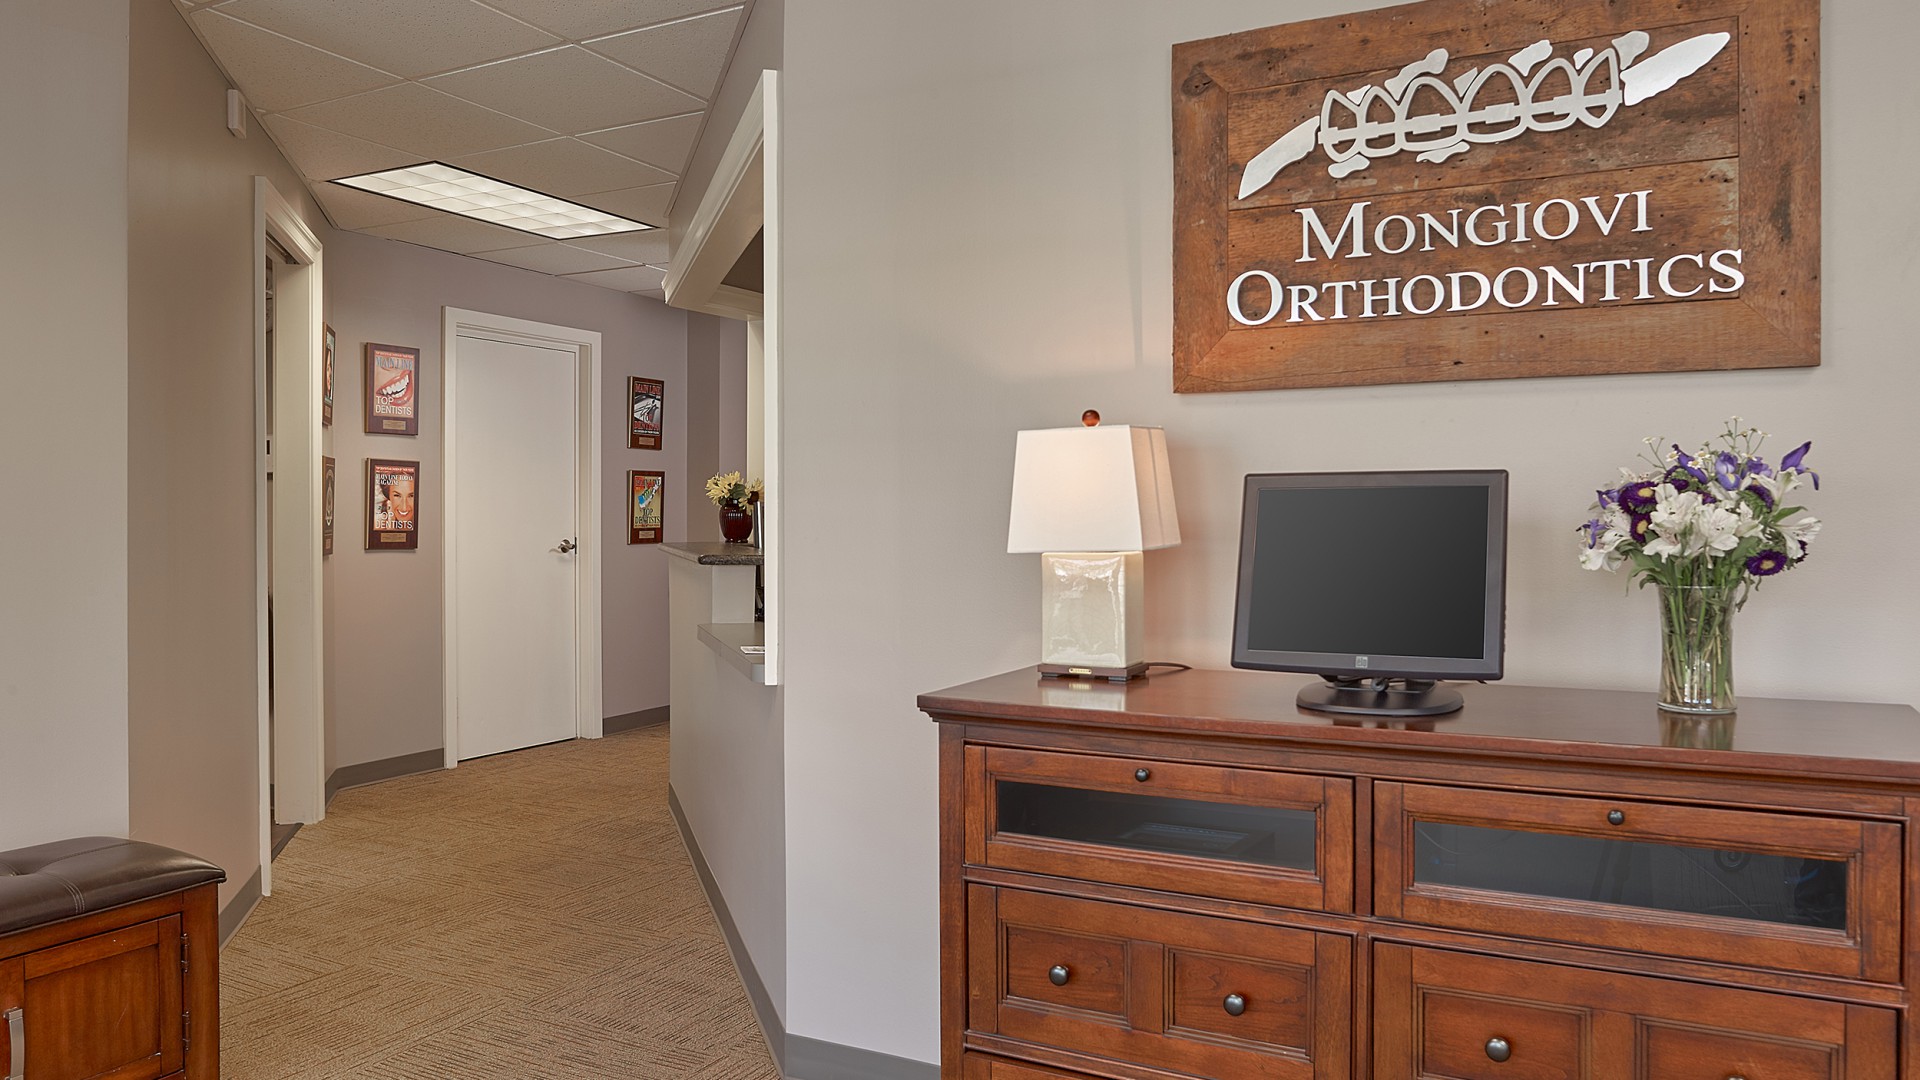 Picture of the front hallway leading to the clinical area, Mongiovi Orthodontics, West Chester PA Orthodontist, Wilmington DE Orthodontist, Kennett Square Orthodontist, Chadds Ford Orthodontist